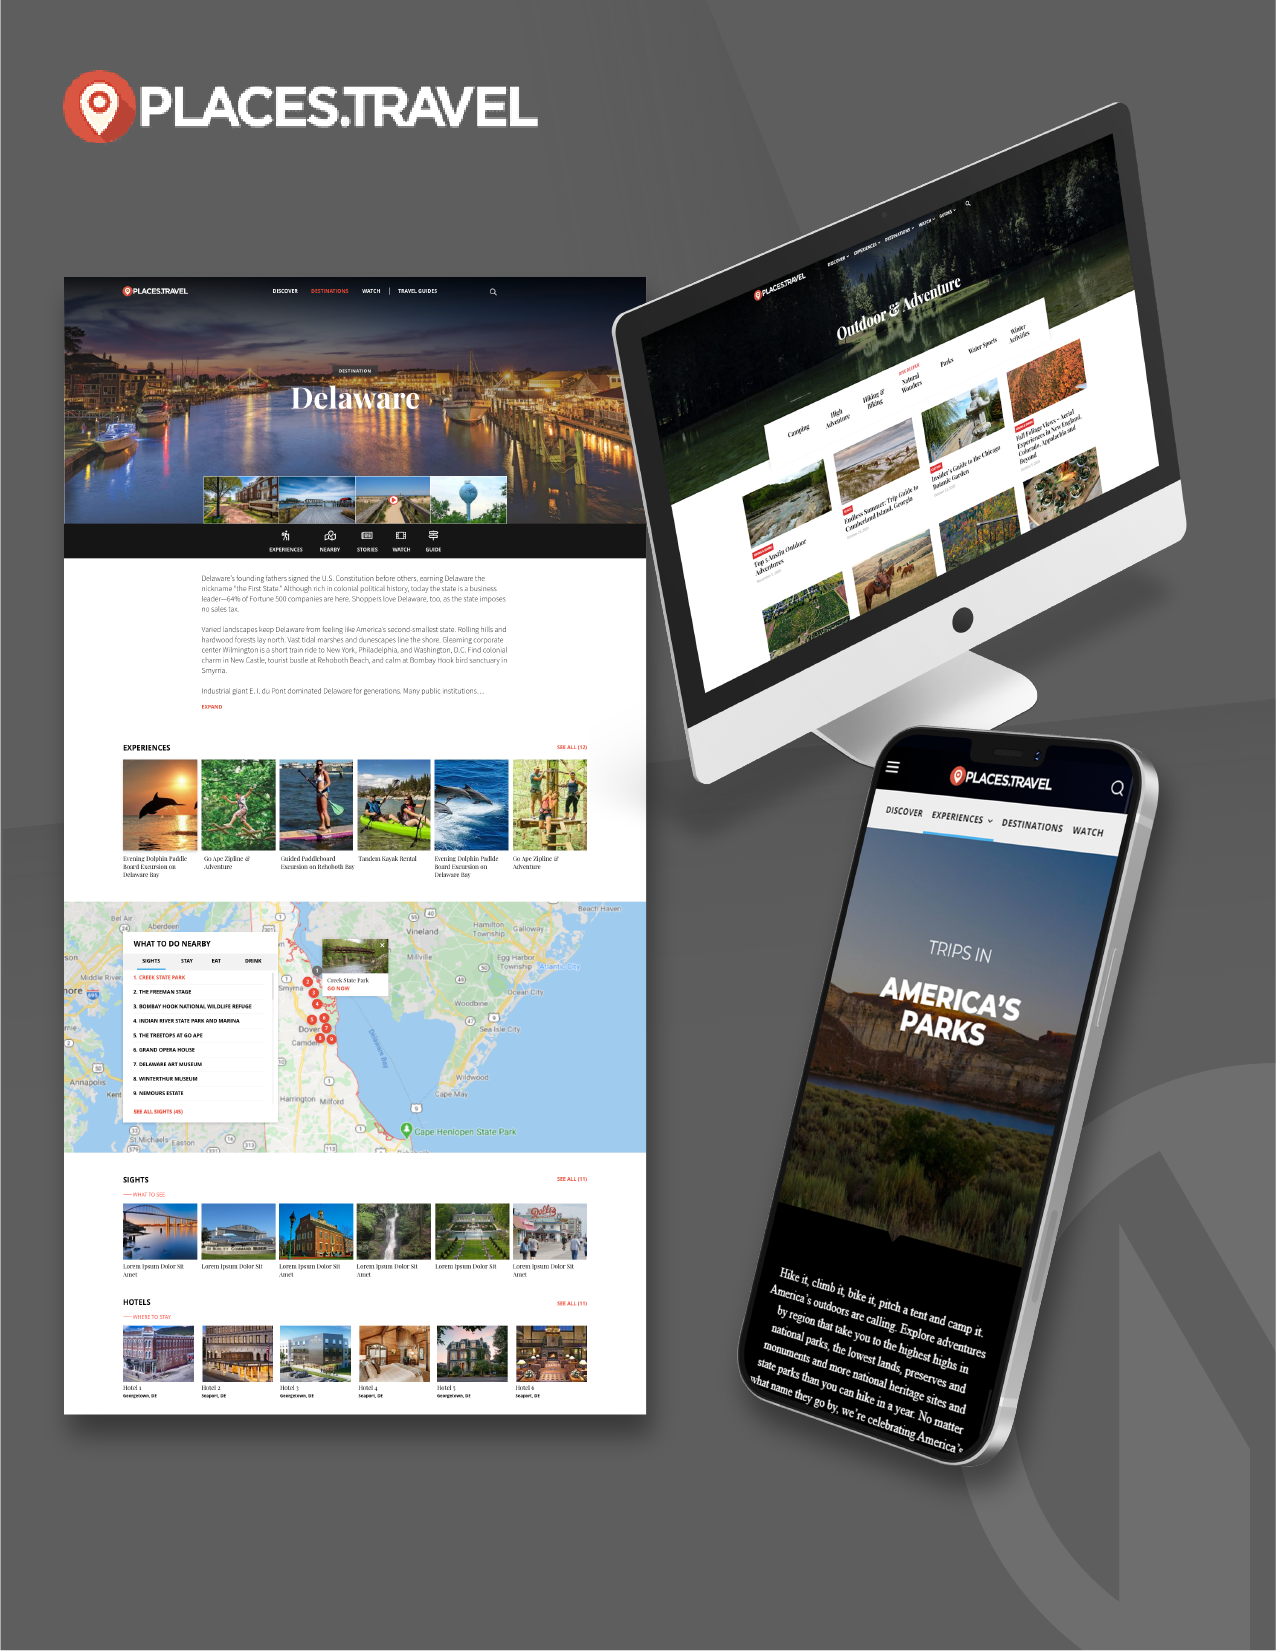 Places.Travel Website overview